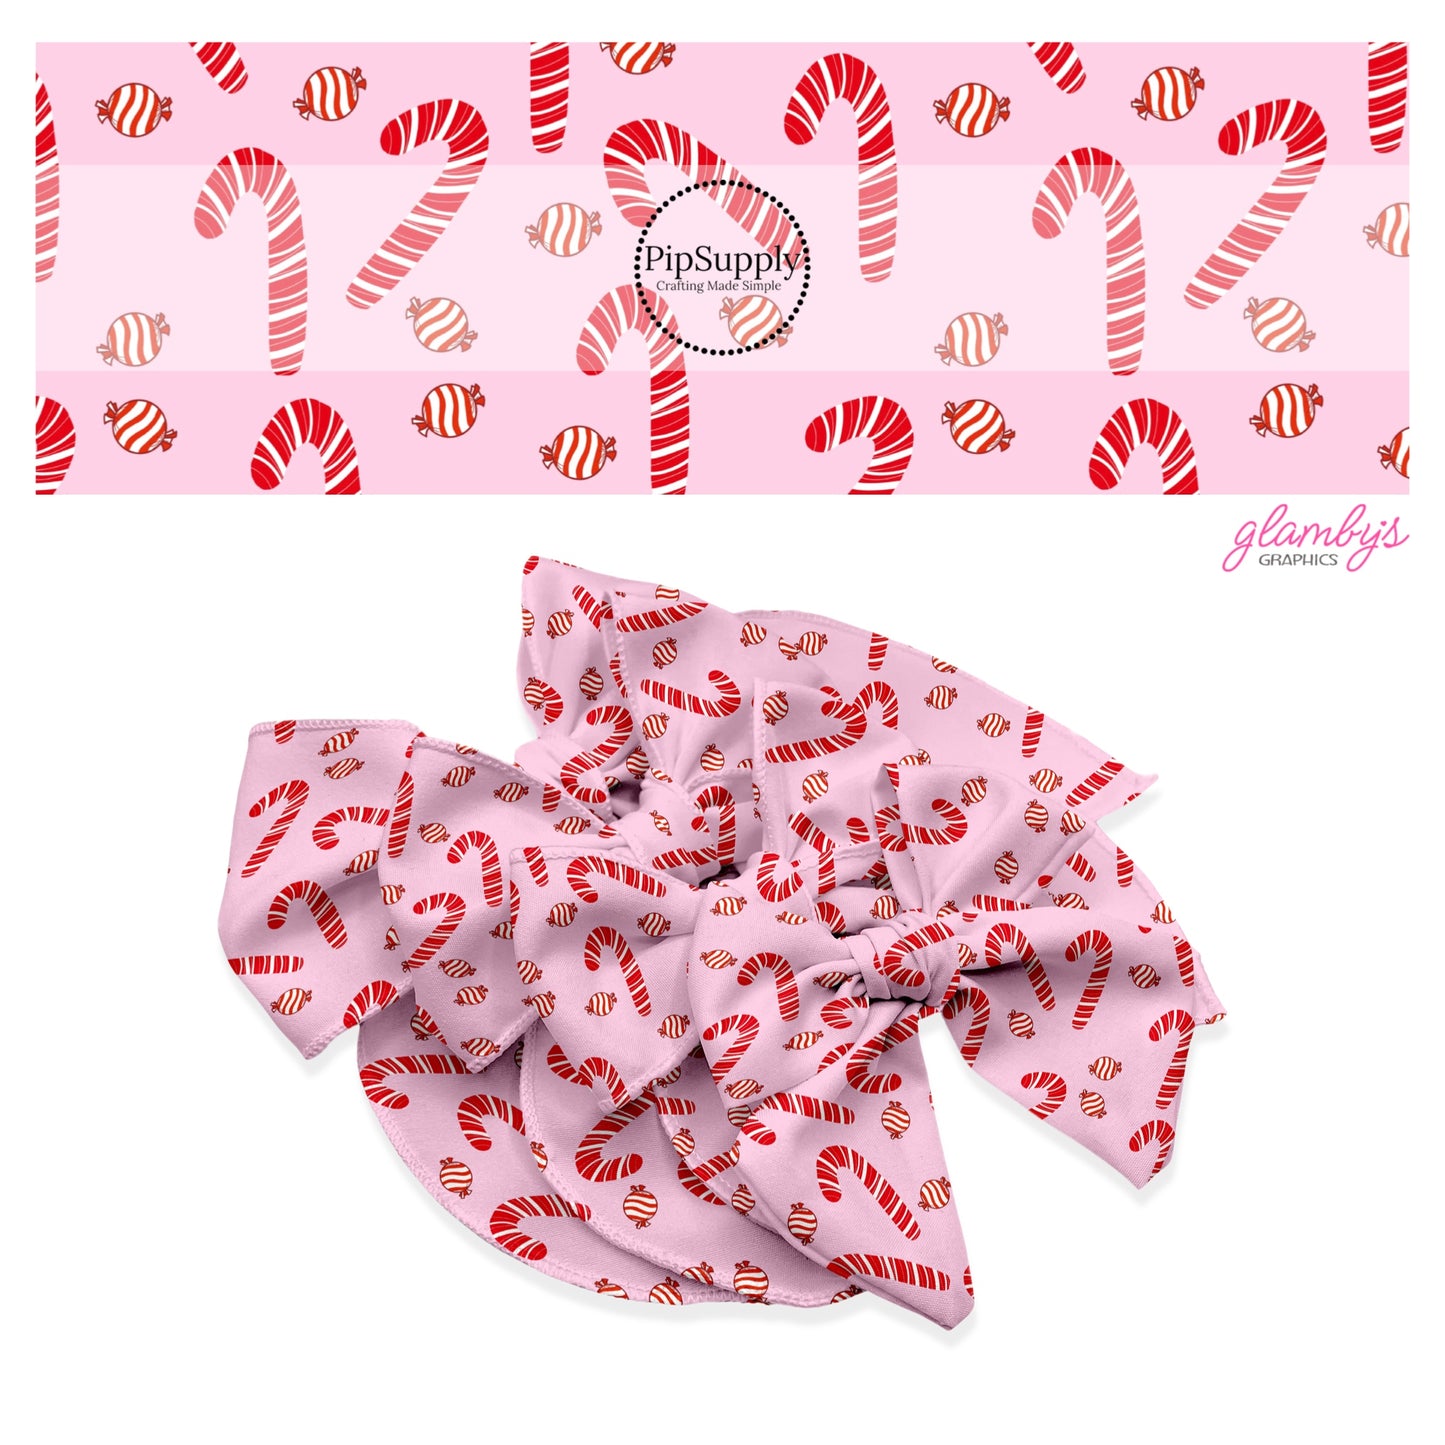 Peppermints and candy on pink hair bow strips